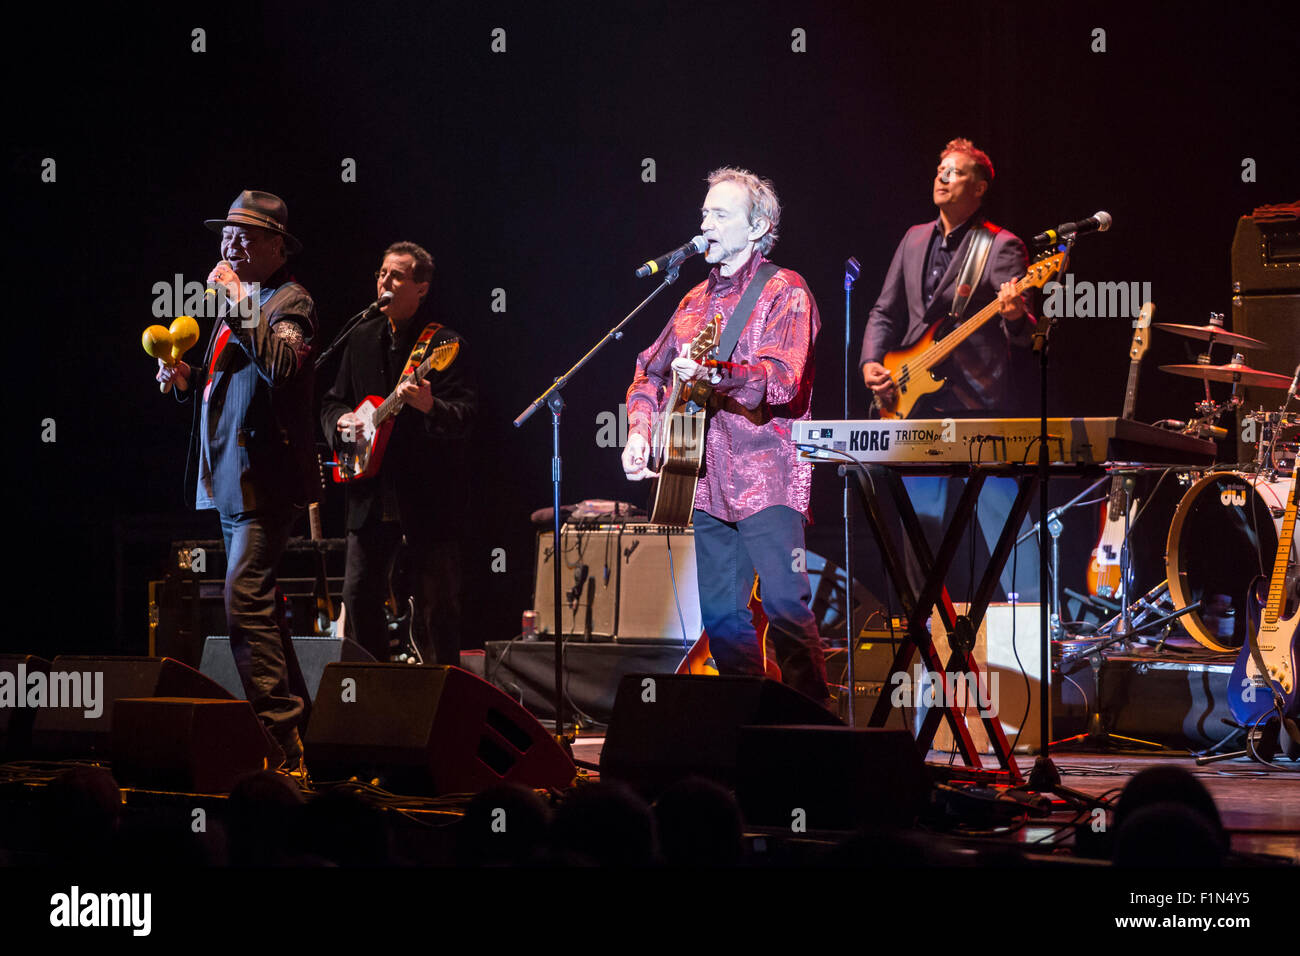 Londra, Regno Unito il 4° settembre 2015. Monkees Live performance, Micky Dolenz & Peter Tork, Hammersmith Eventim Credit: Robert Stainforth/Alamy Live News Foto Stock